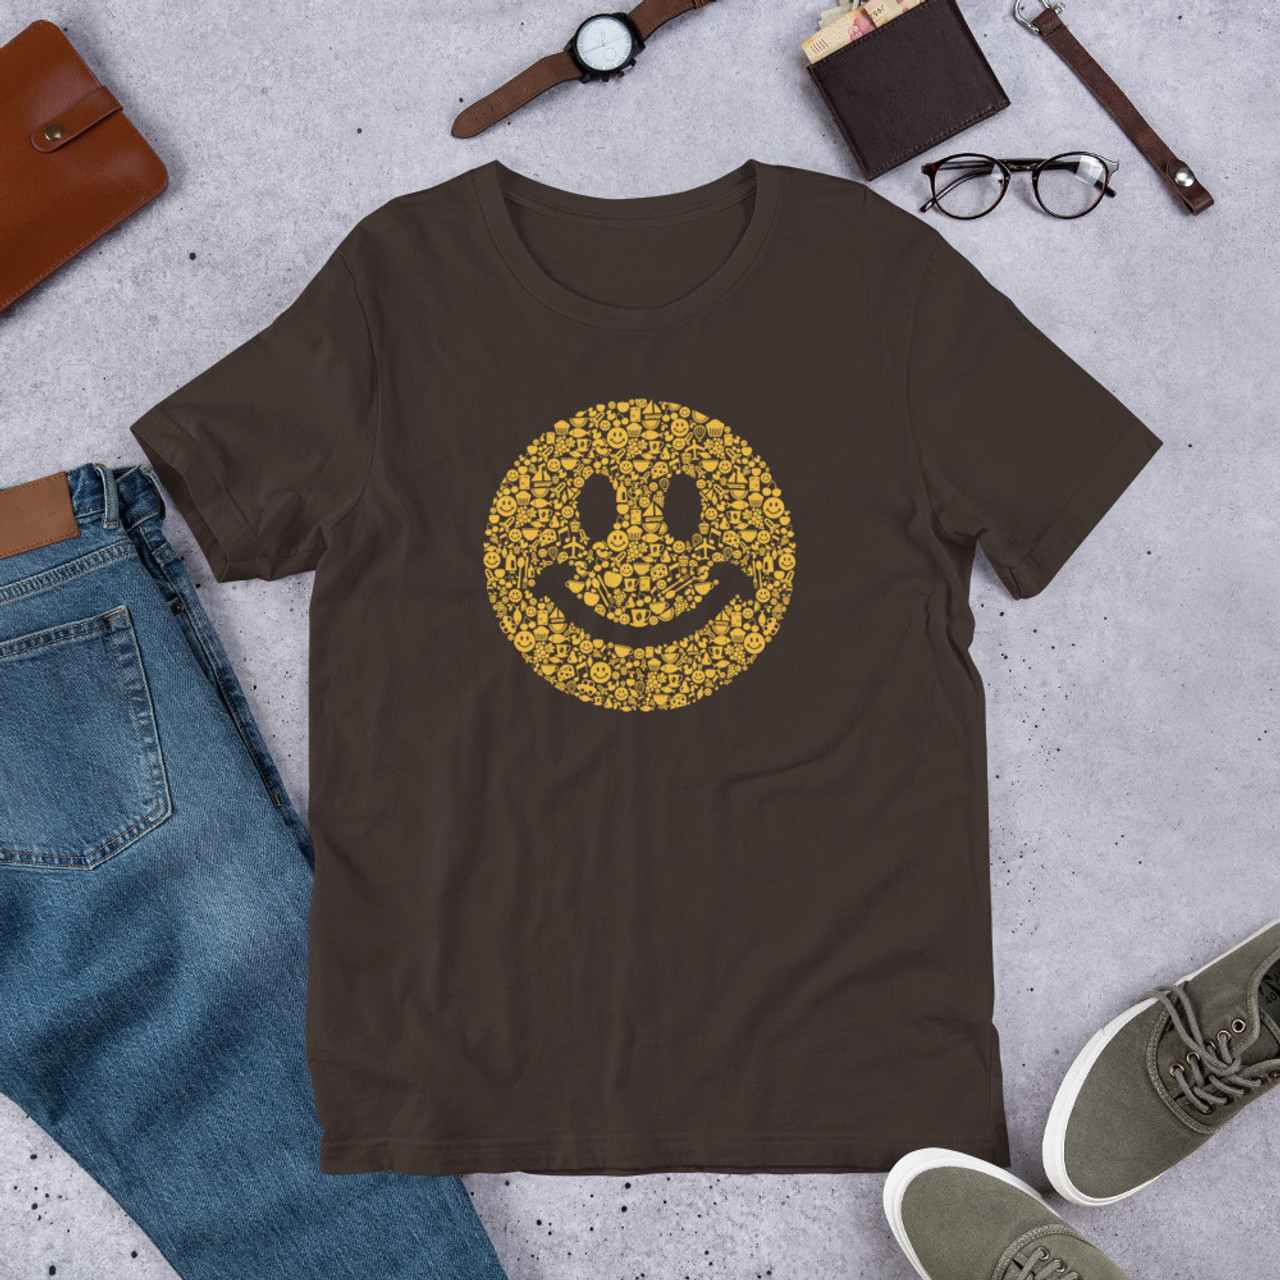 Brown T-Shirt - Bella + Canvas 3001 Smile Within A Smile